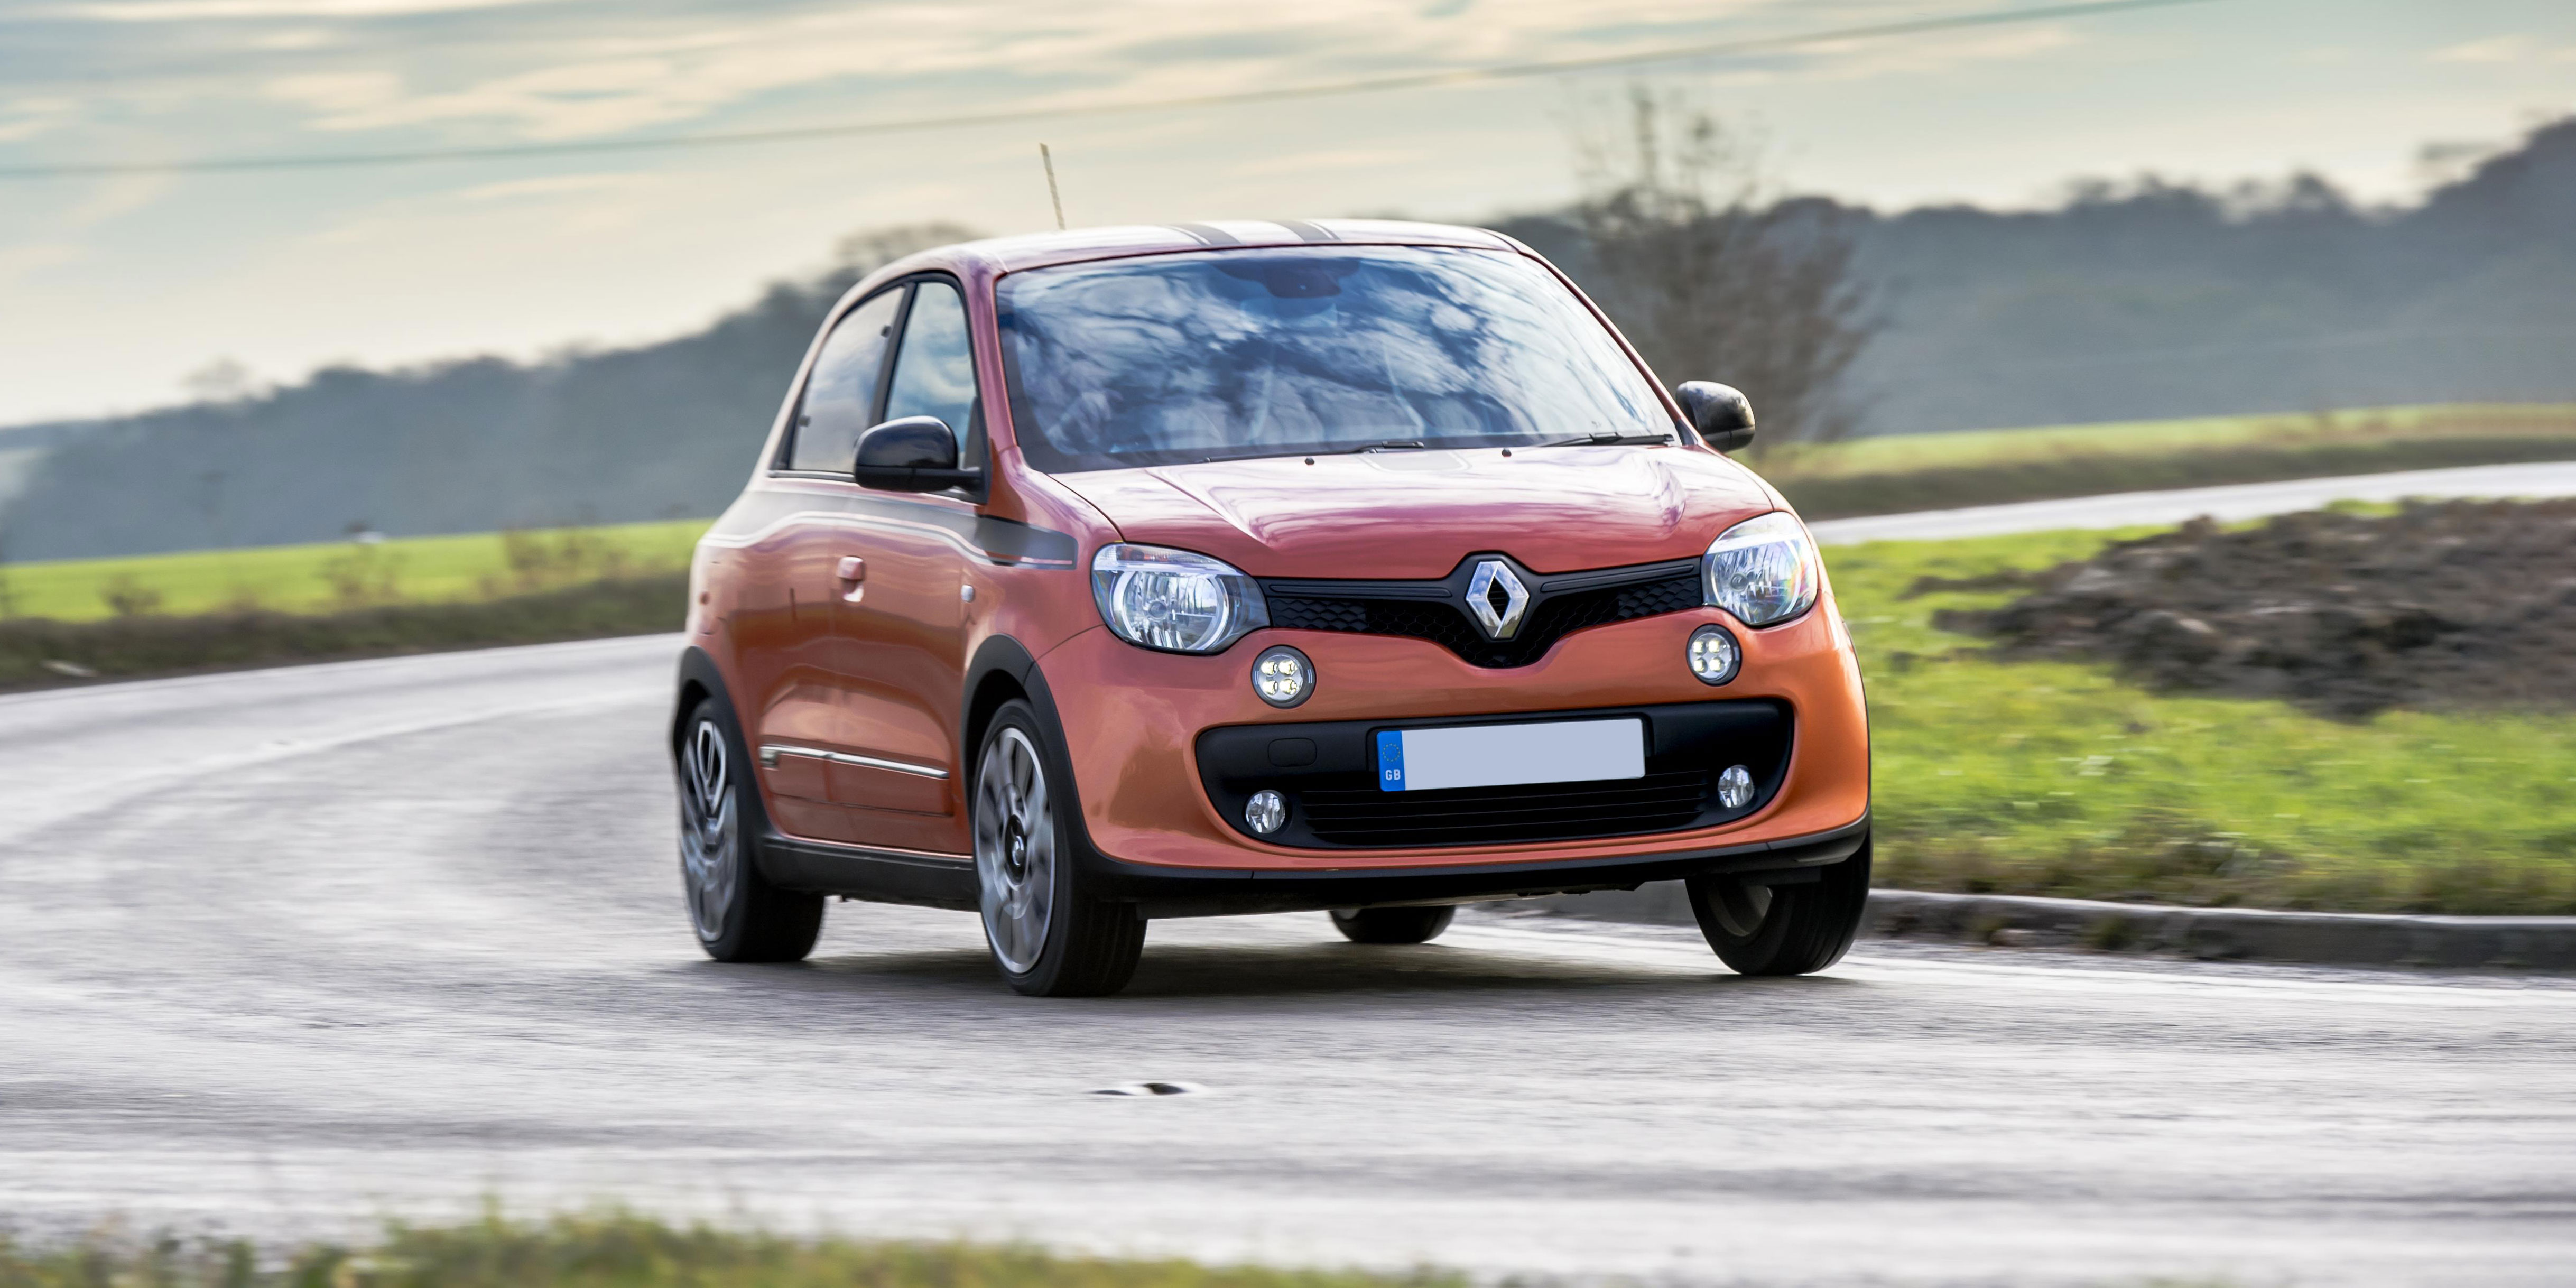 Renault's Twingo to Be Reborn as Electric Car Priced Less Than